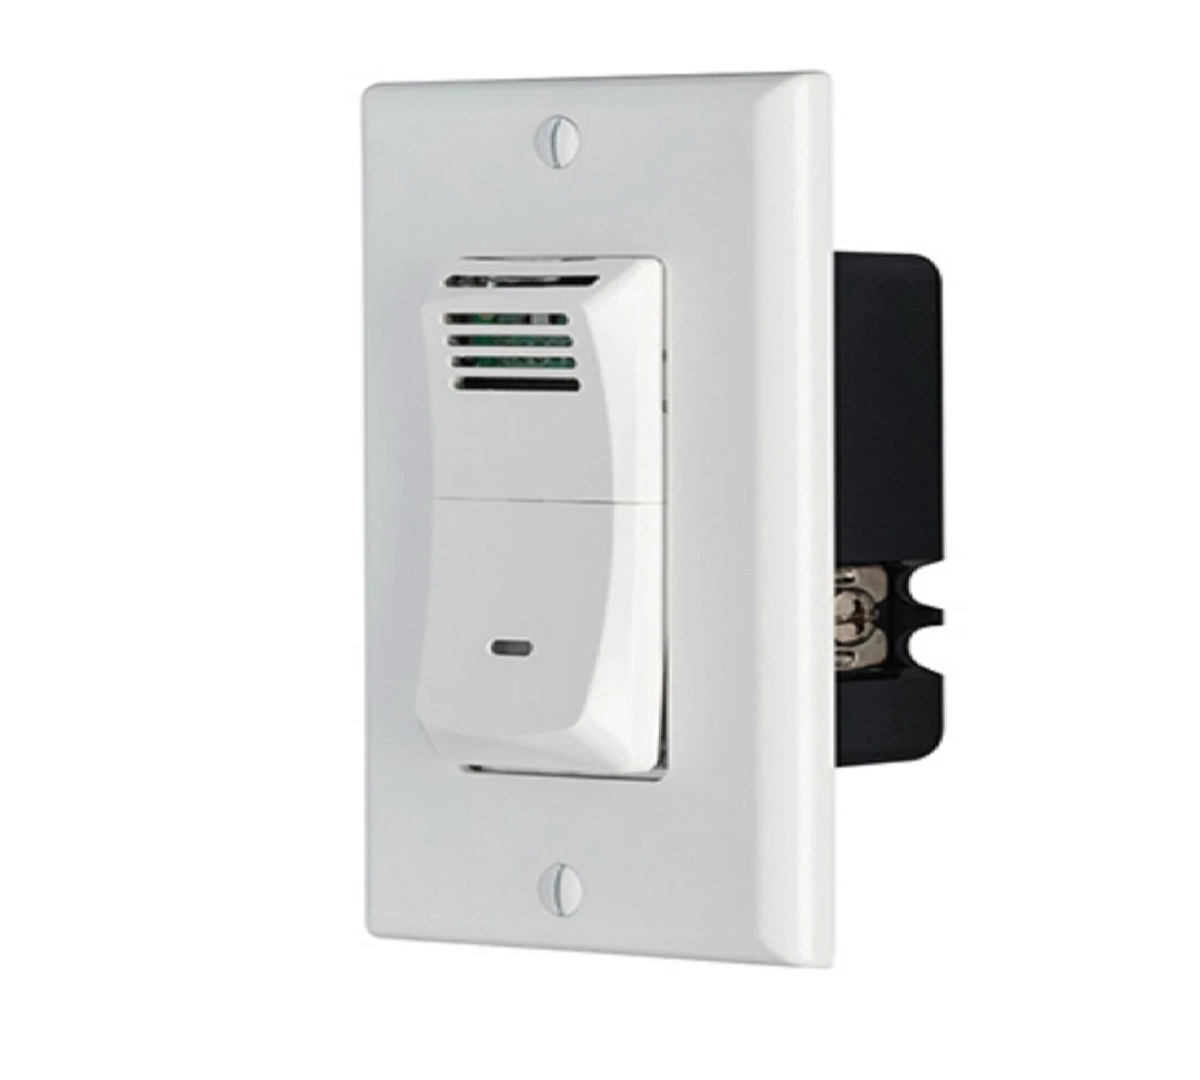 Picture of Broan-Nutone 264703 Humidity Control Switch, White